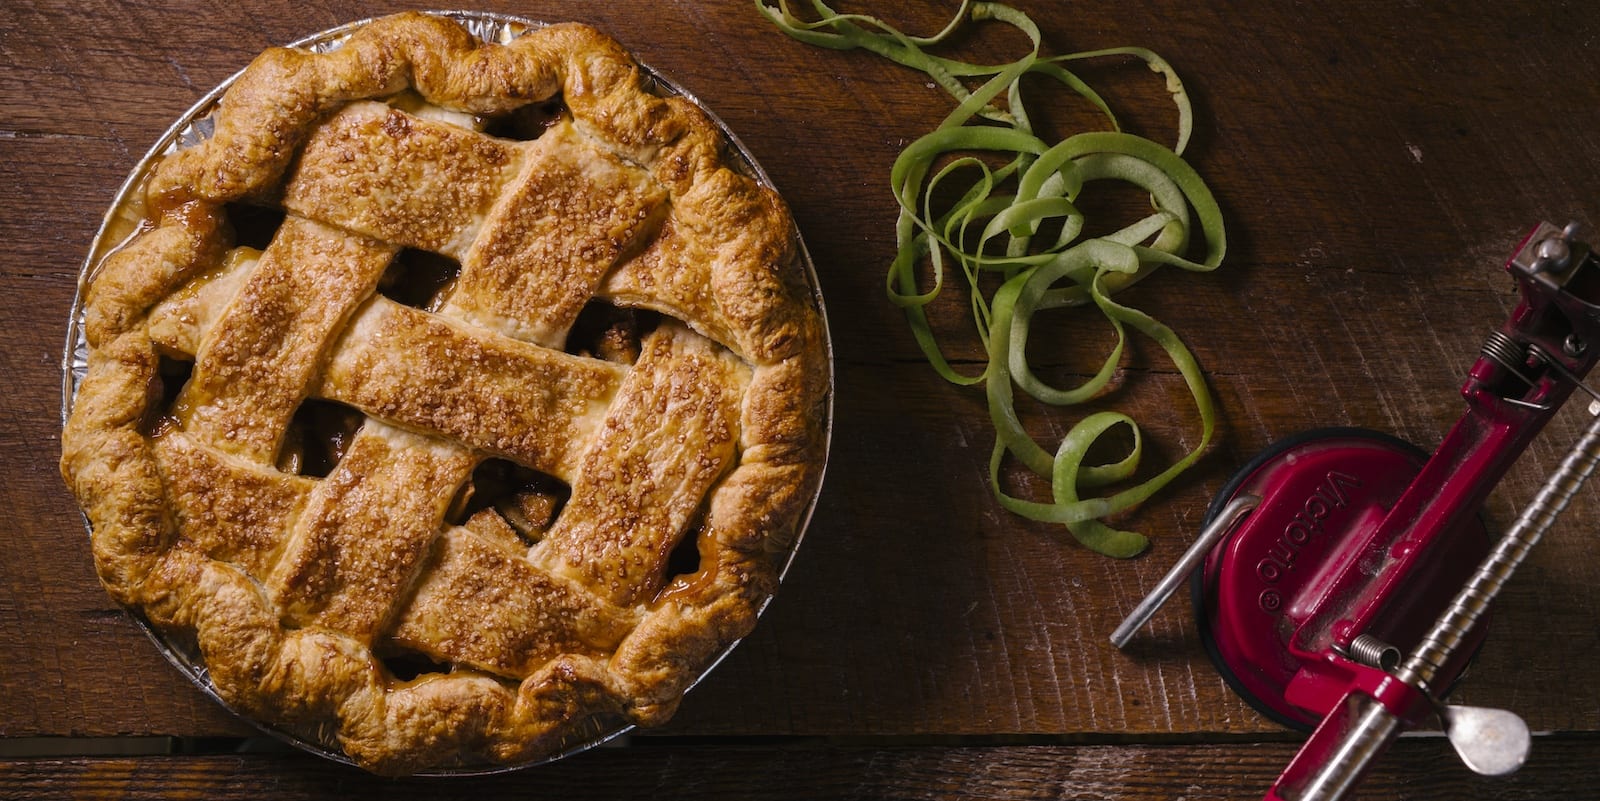 Whole apple pie is something every baker needs in their collection of apple recipes